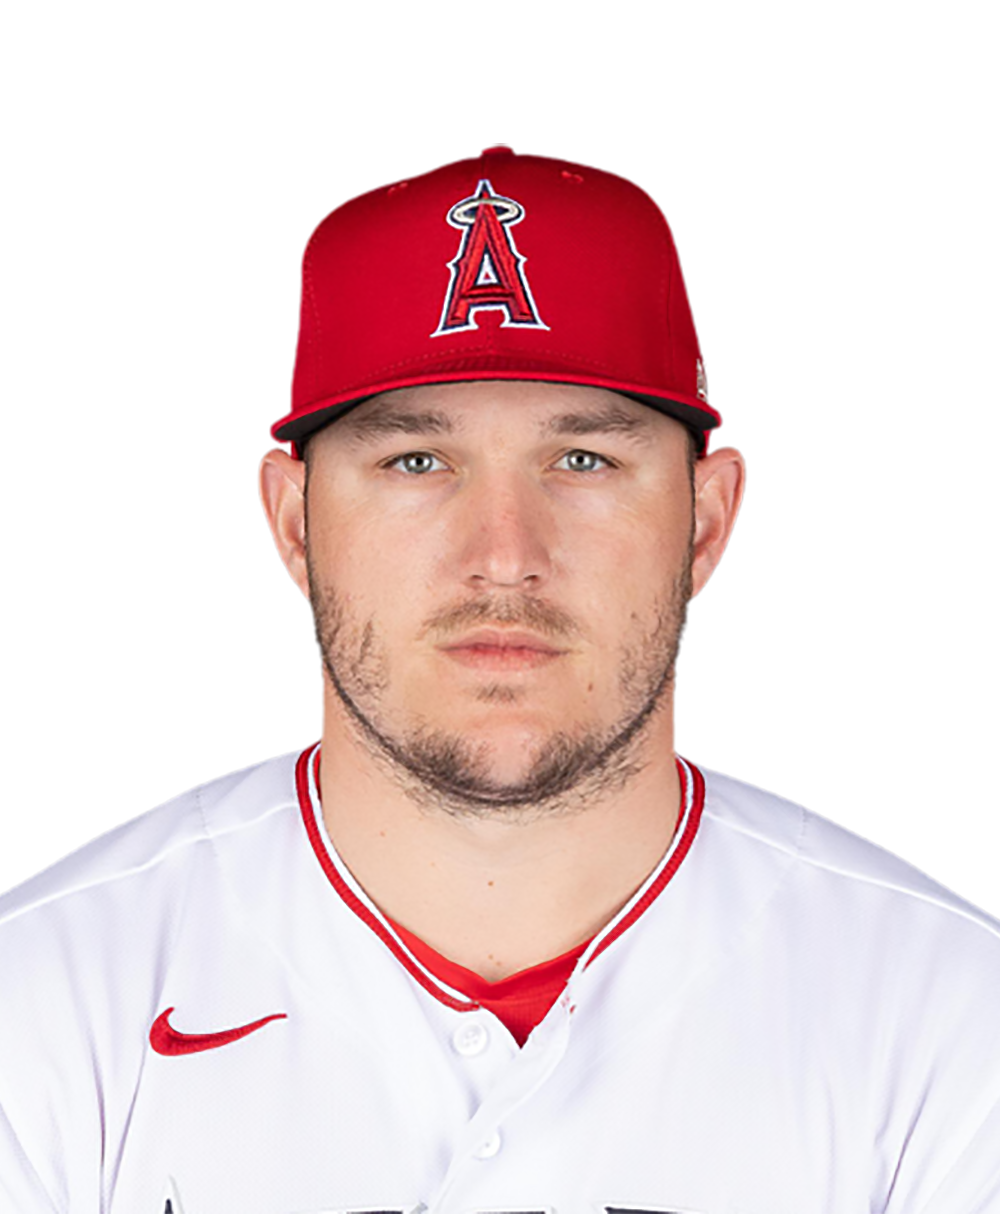 Mike Trout headshot